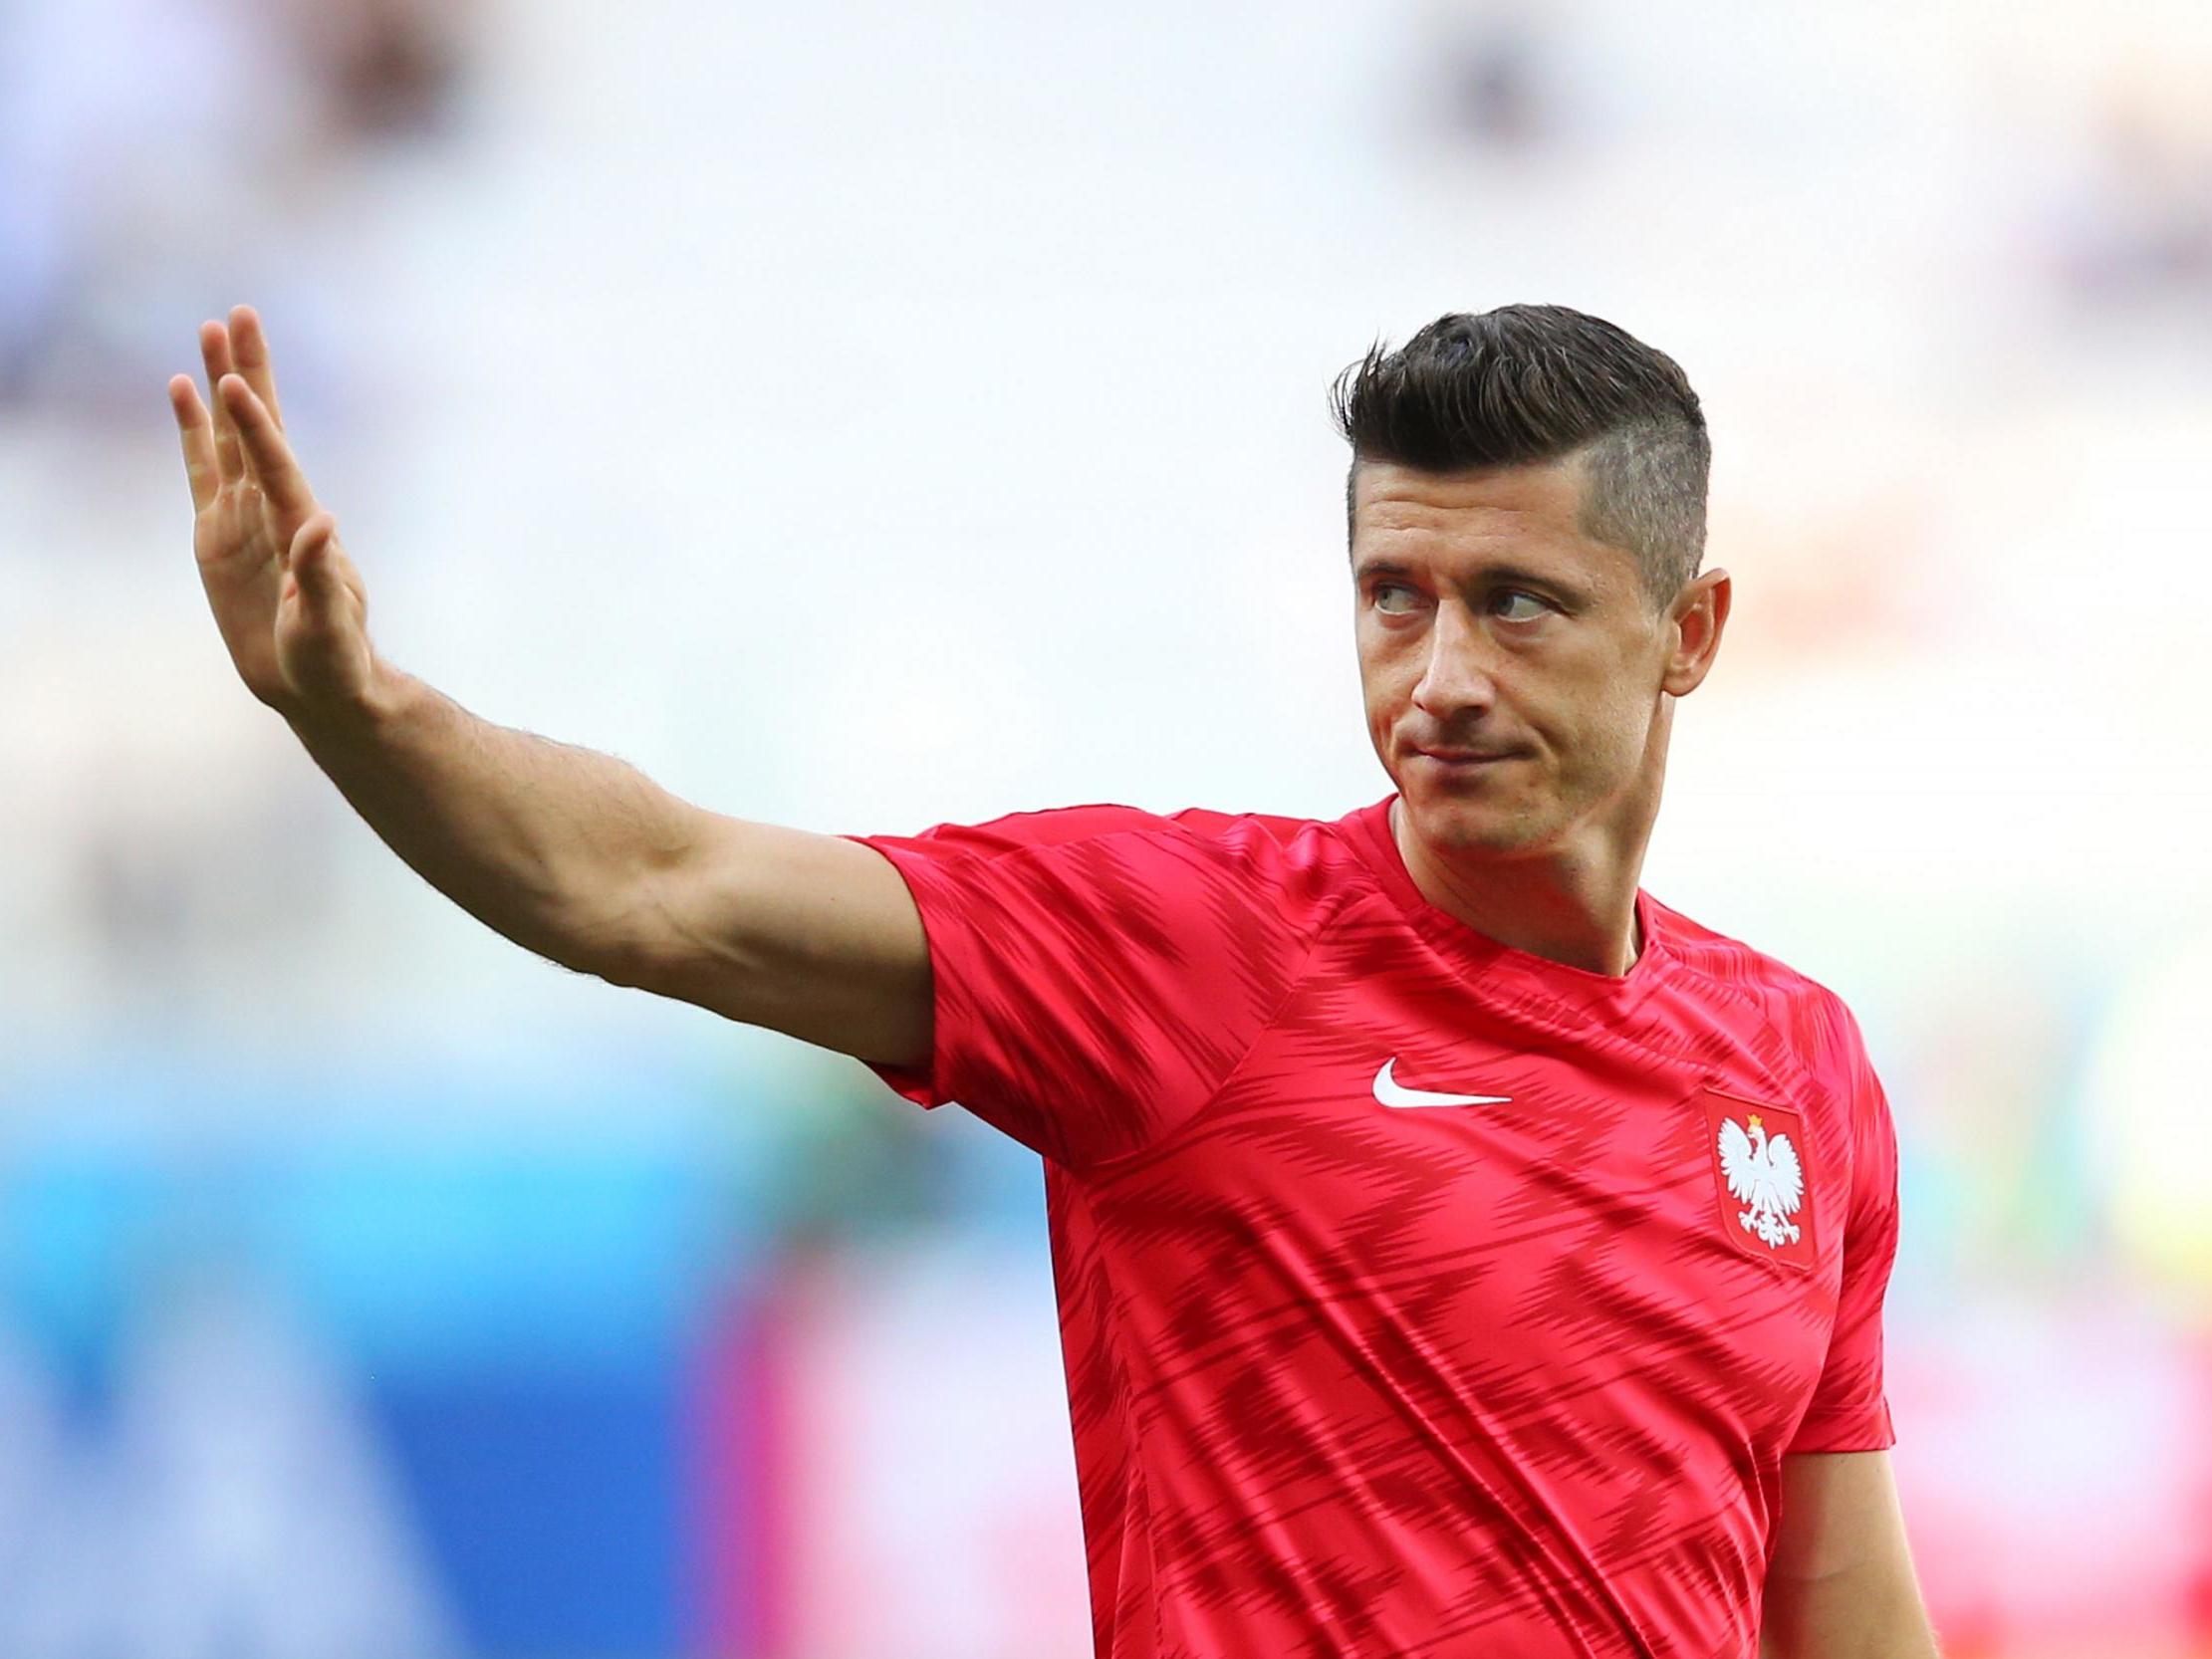 Transfer news, rumours - LIVE: Chelsea want Robert Lewandowski, new Liverpool target, Manchester United chase Harry Maguire plus Arsenal, Spurs